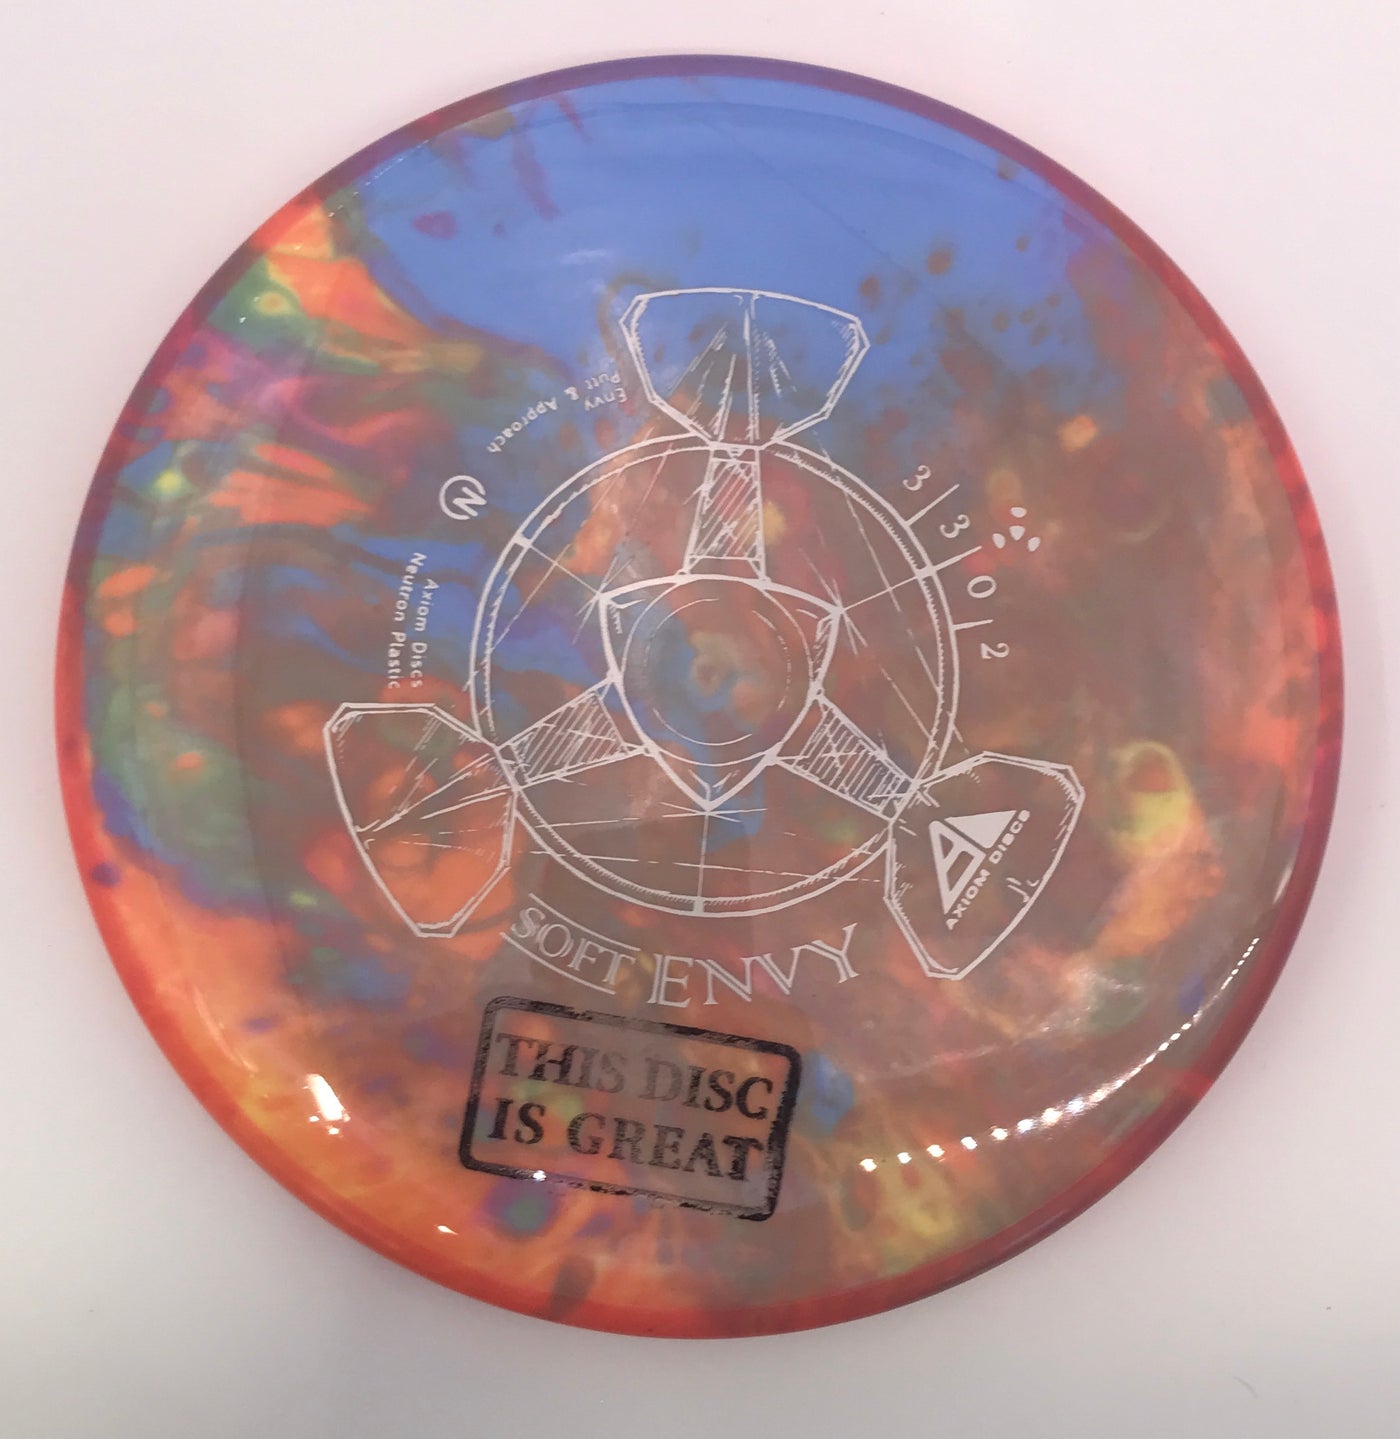 These Dyes Are Great from Disc Store Nate